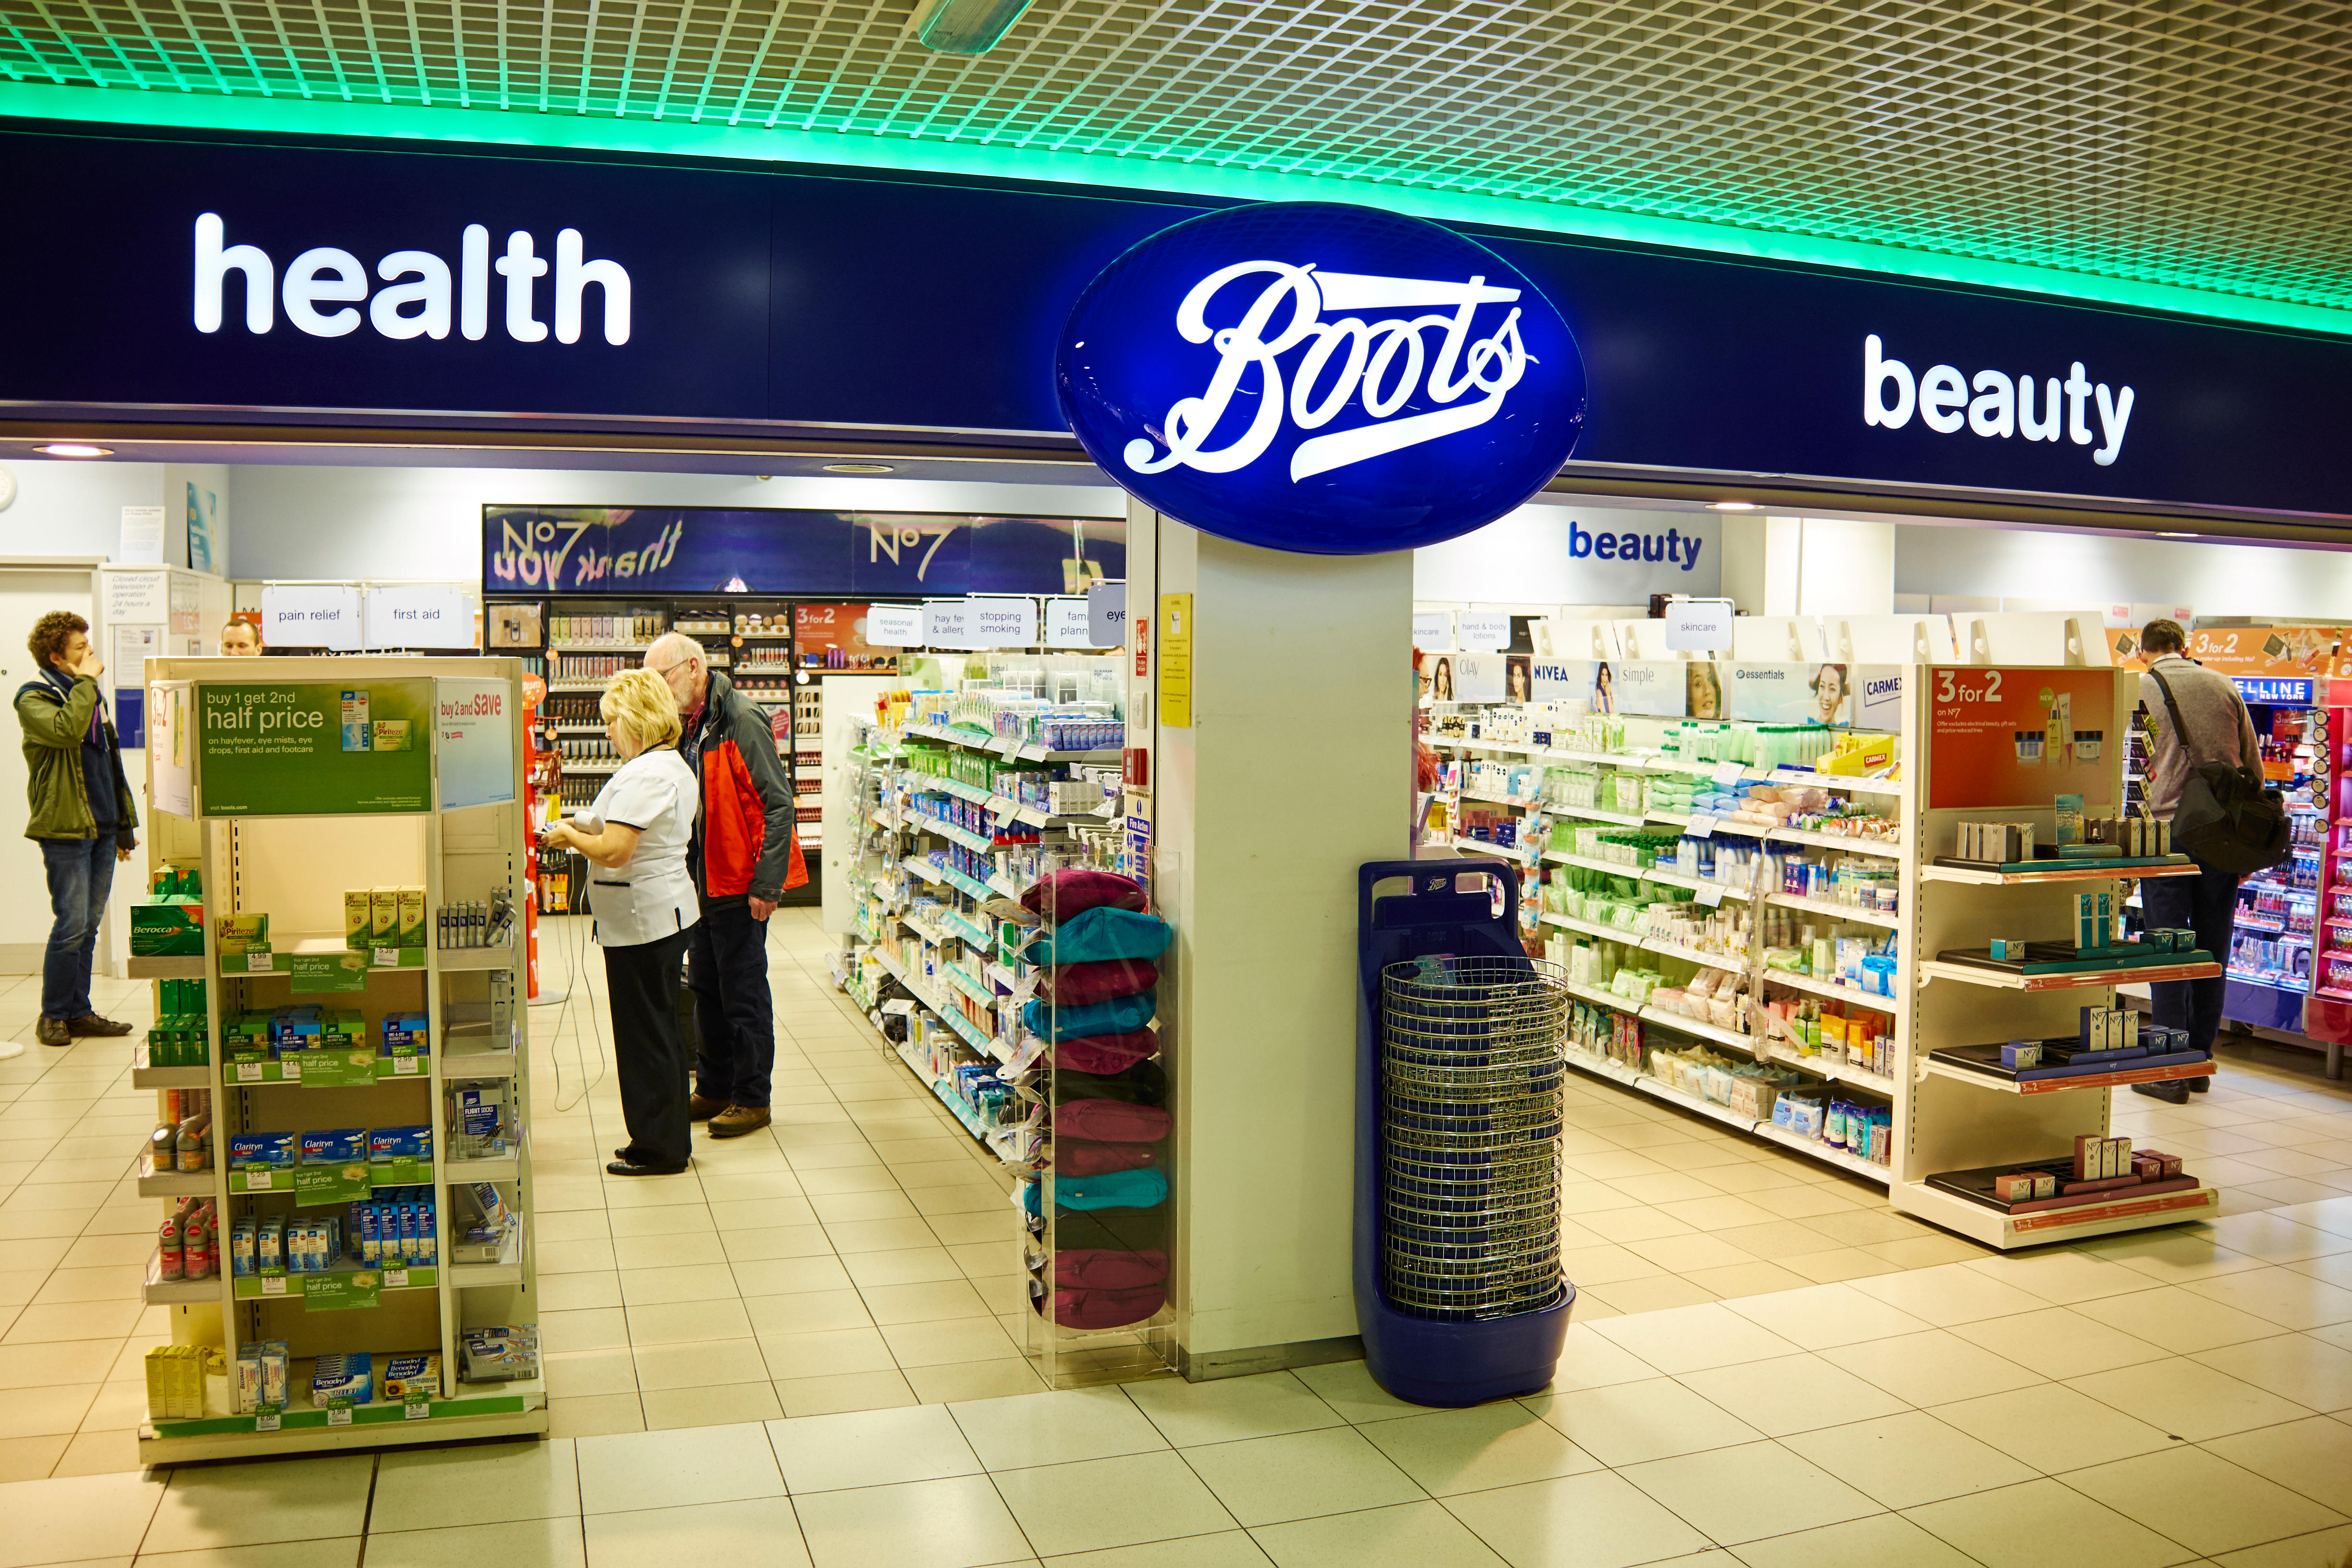 Boots makes ‘ridiculous’ change to fees as shoppers fume about 'pure greed'